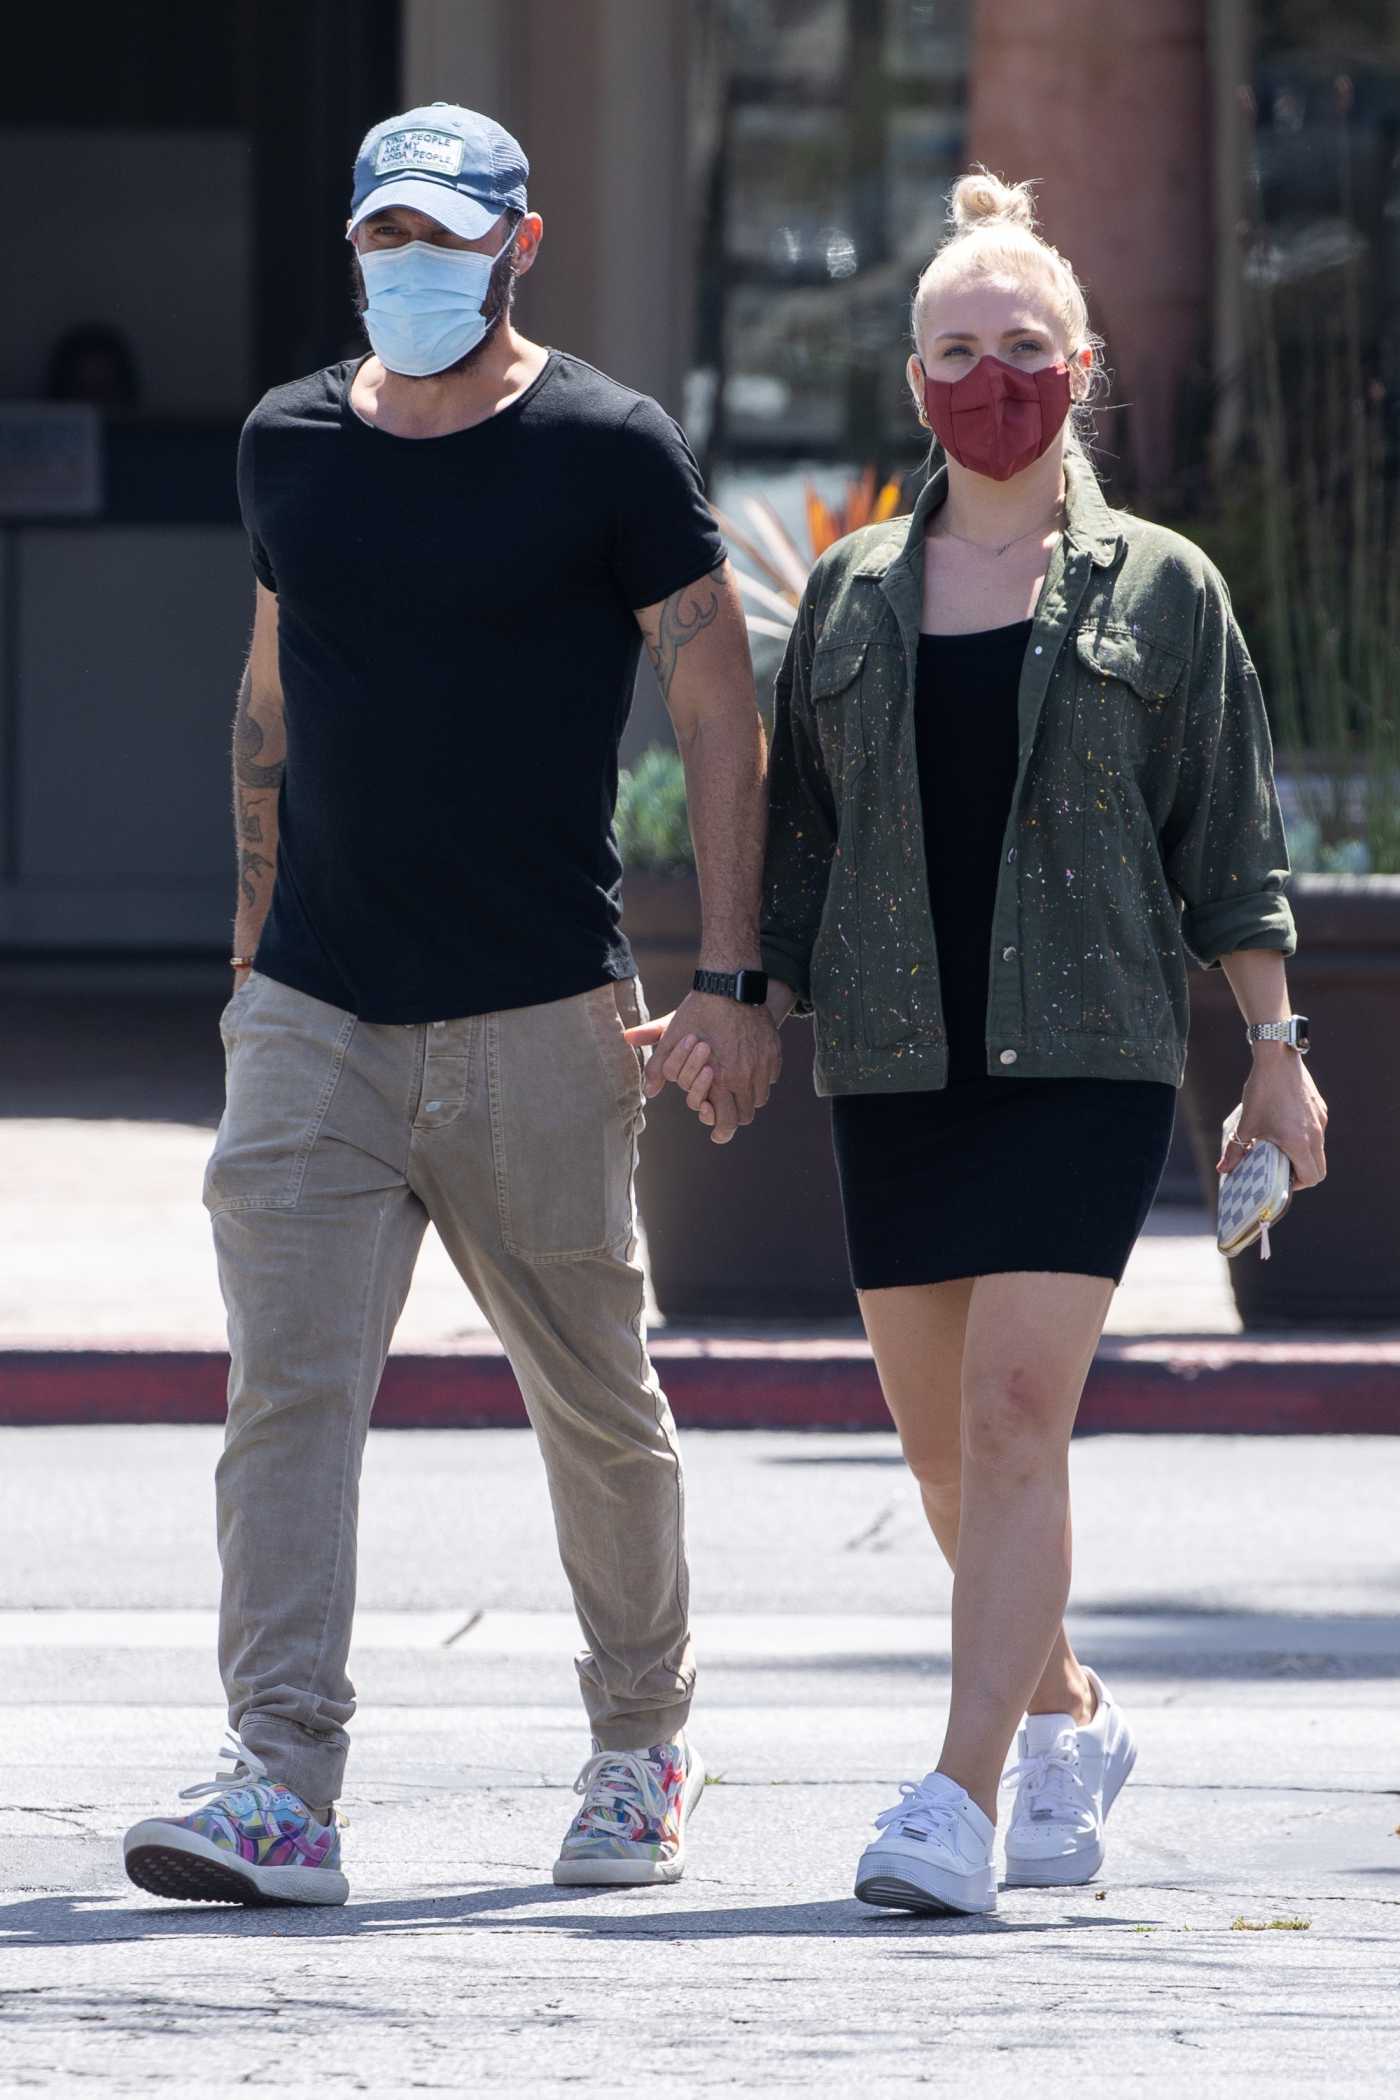 Sharna Burgess in a White Sneakers Was Seen Out with Brian Austin Green in Malibu 04/09/2021